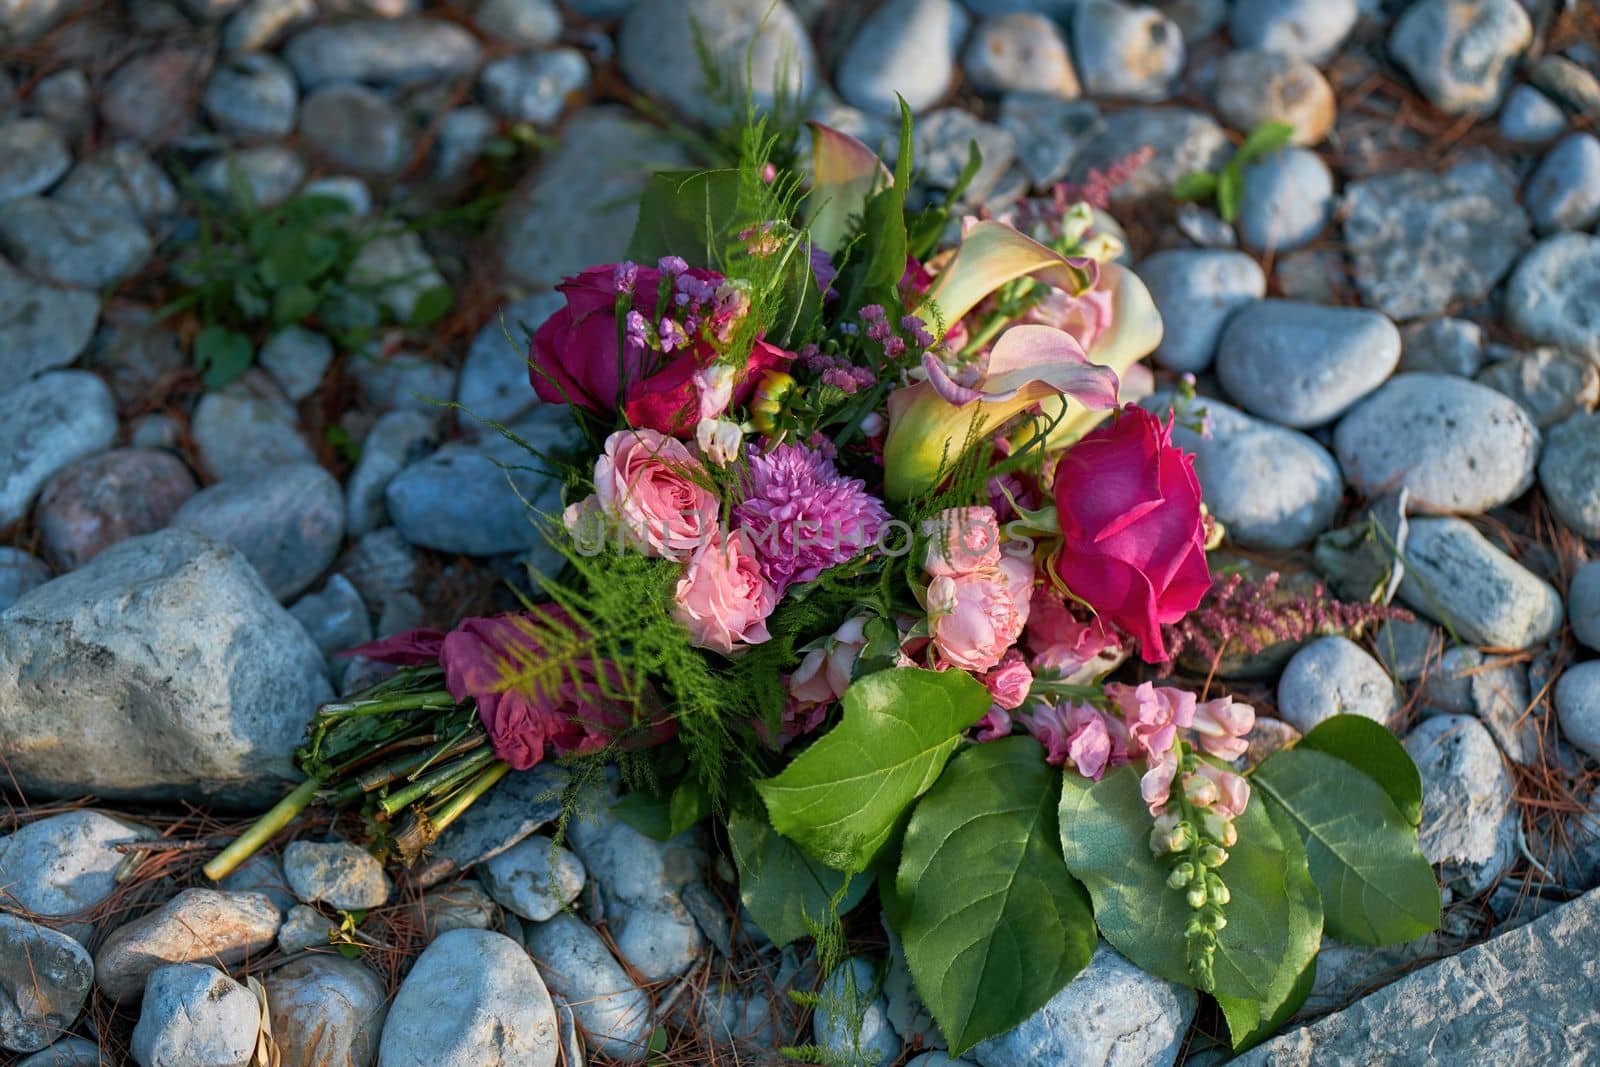 Wedding flowers, bridal bouquet closeup with roses and lilies on a Pebble and Rock Background with ambient evening lighting